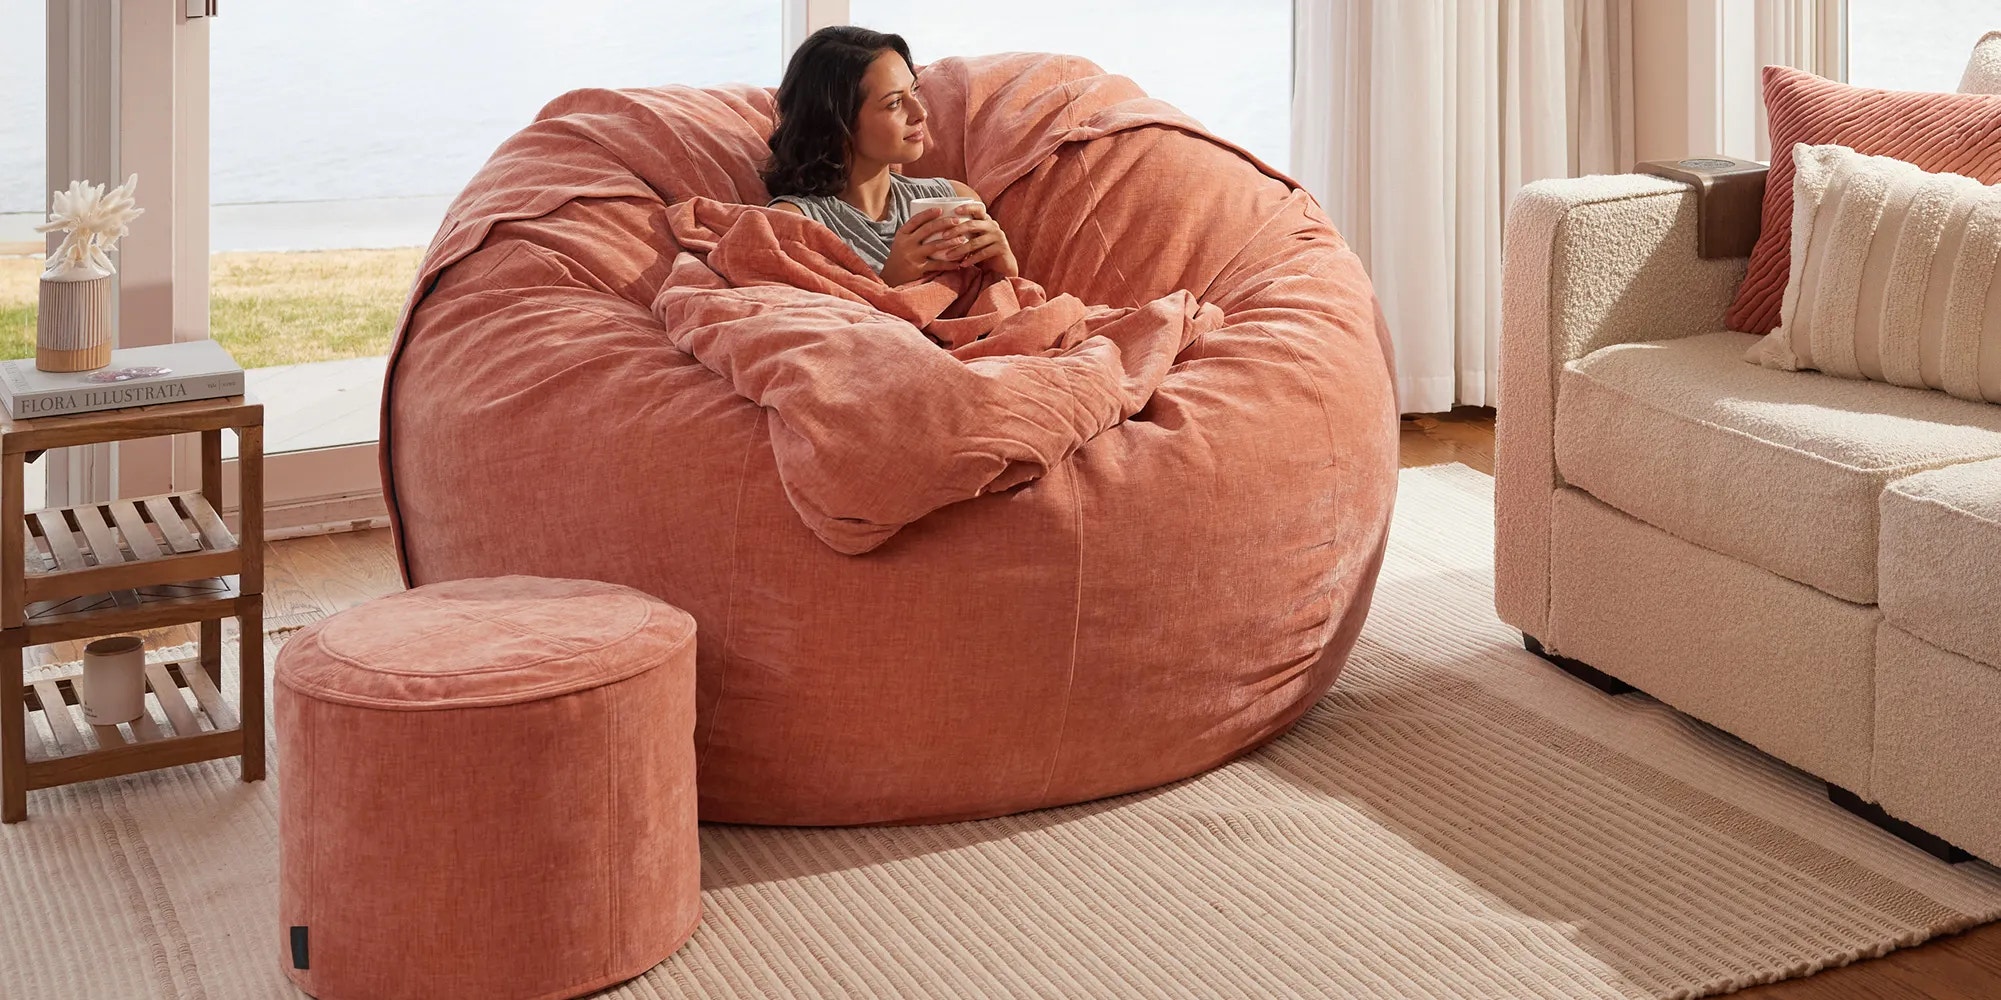 Woman relaxing on a Lovesac Sac bean bag chair with blanket and Squattoman footstool